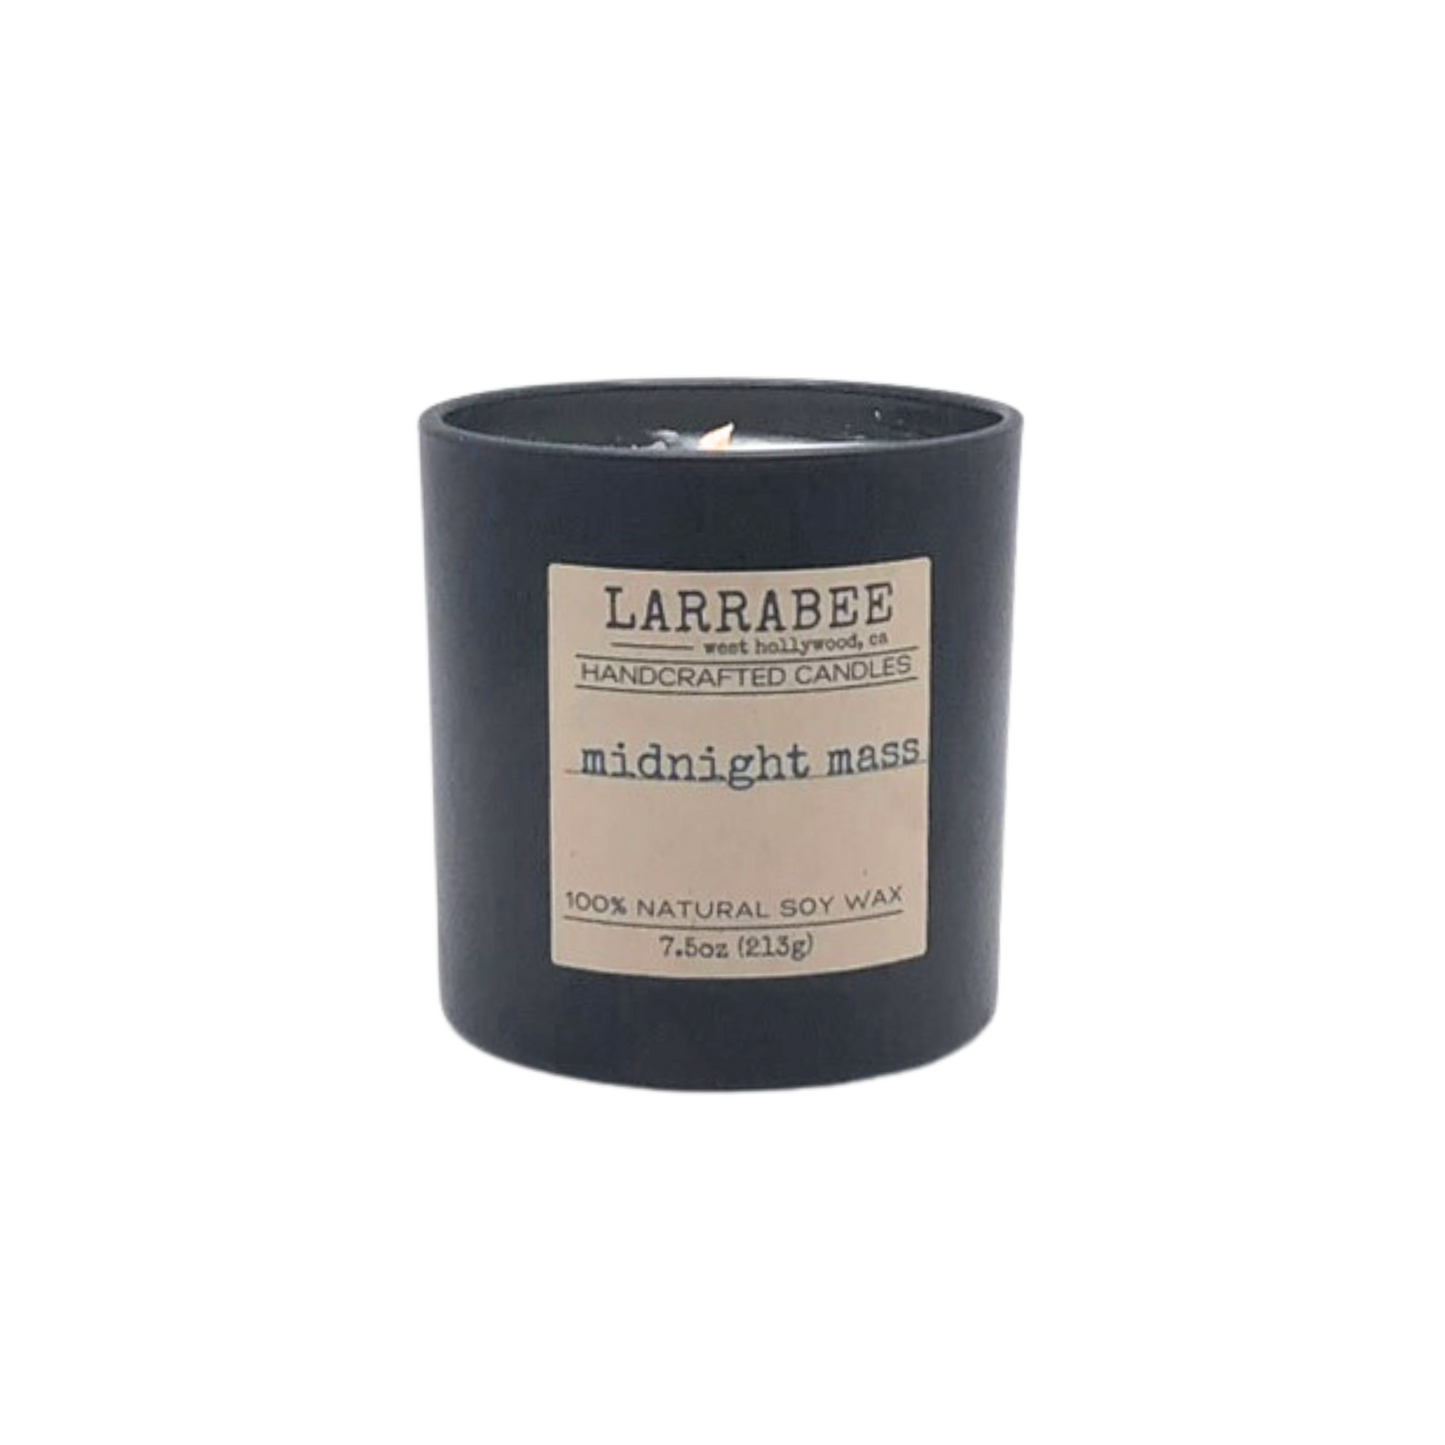 Midnight Mass handcrafted candle